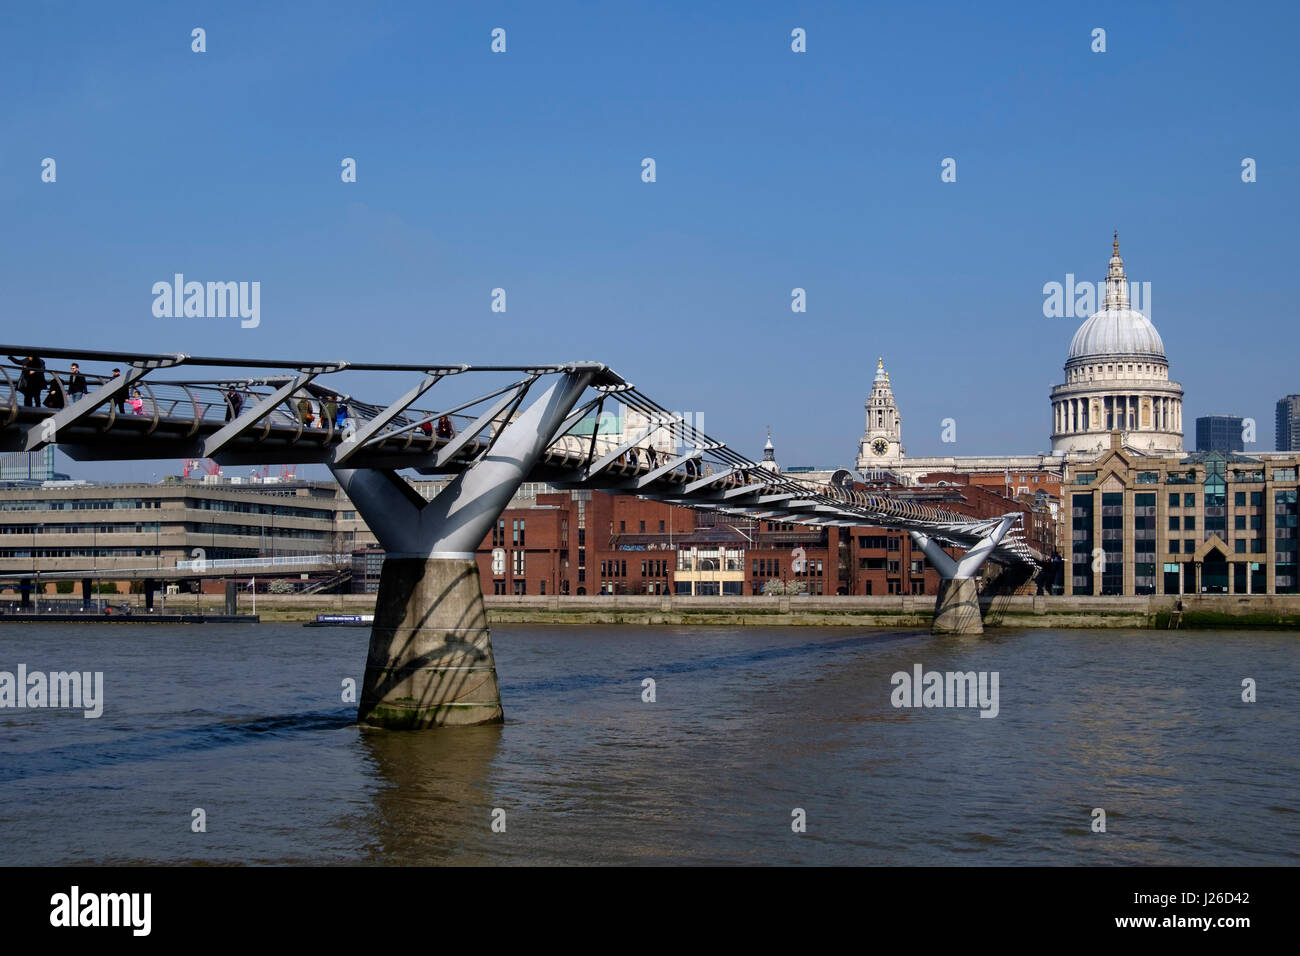 Millennium Bridge with St. Paul's Cathedral in the background, London, England, UK, Europe Stock Photo